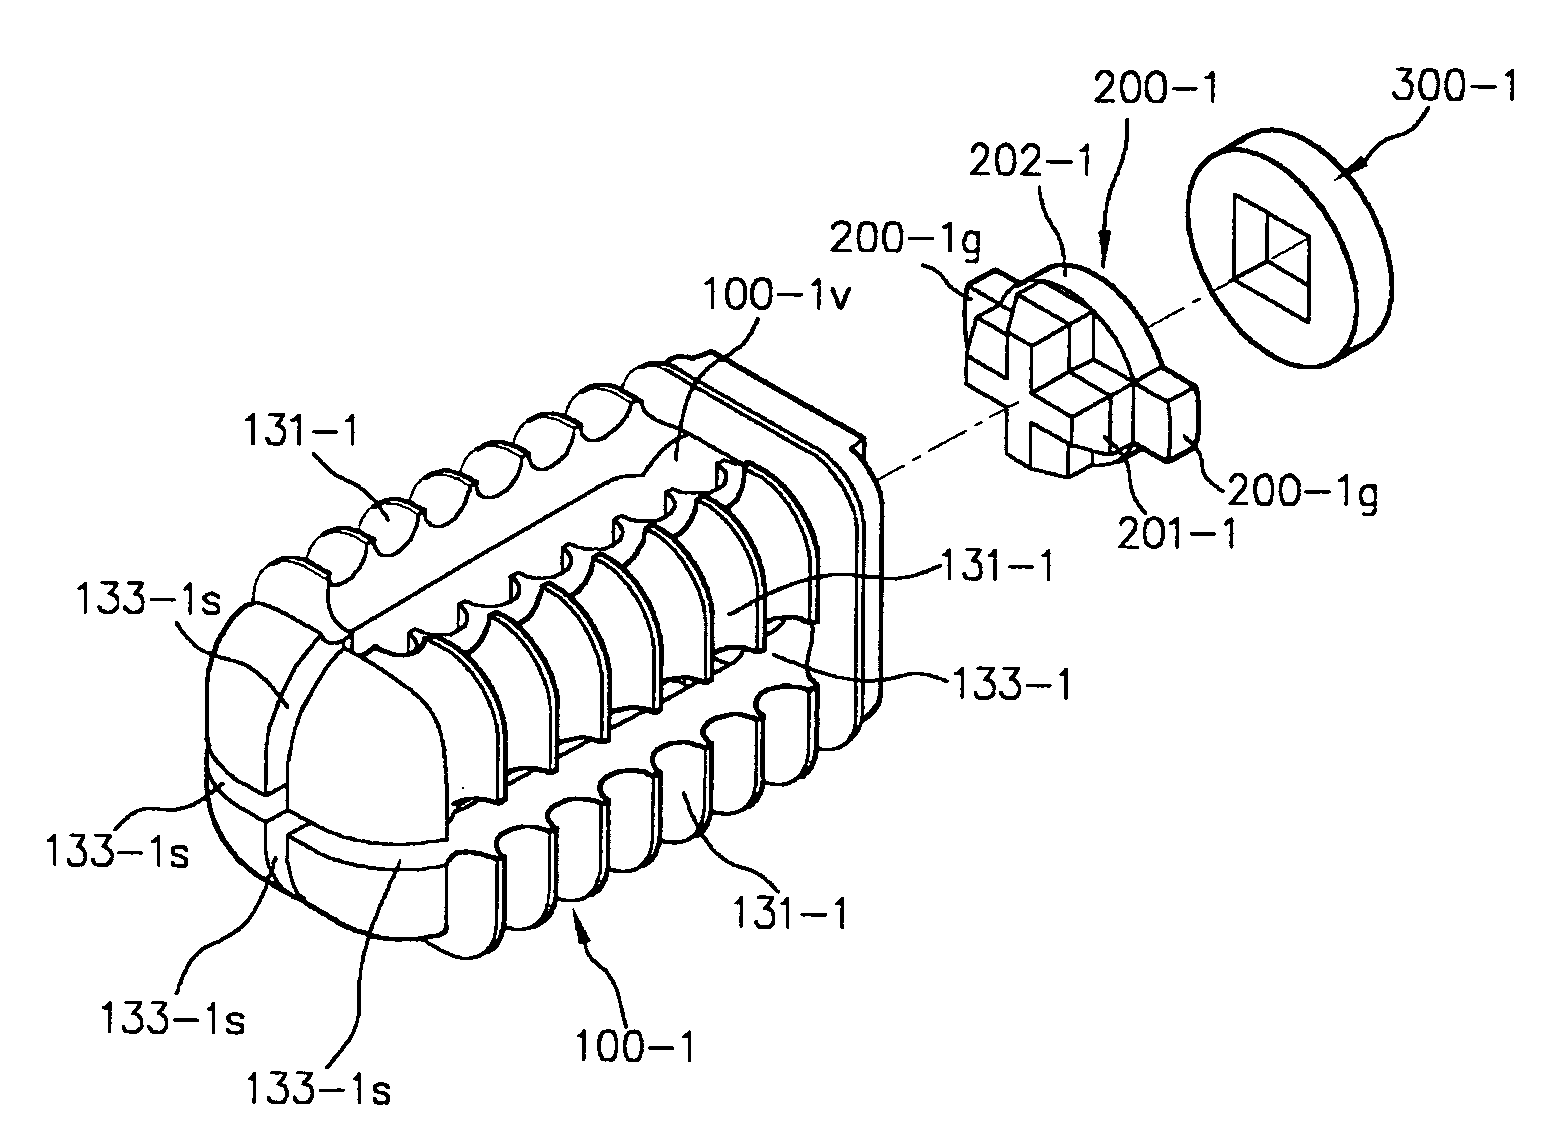 Expandable interfusion cage